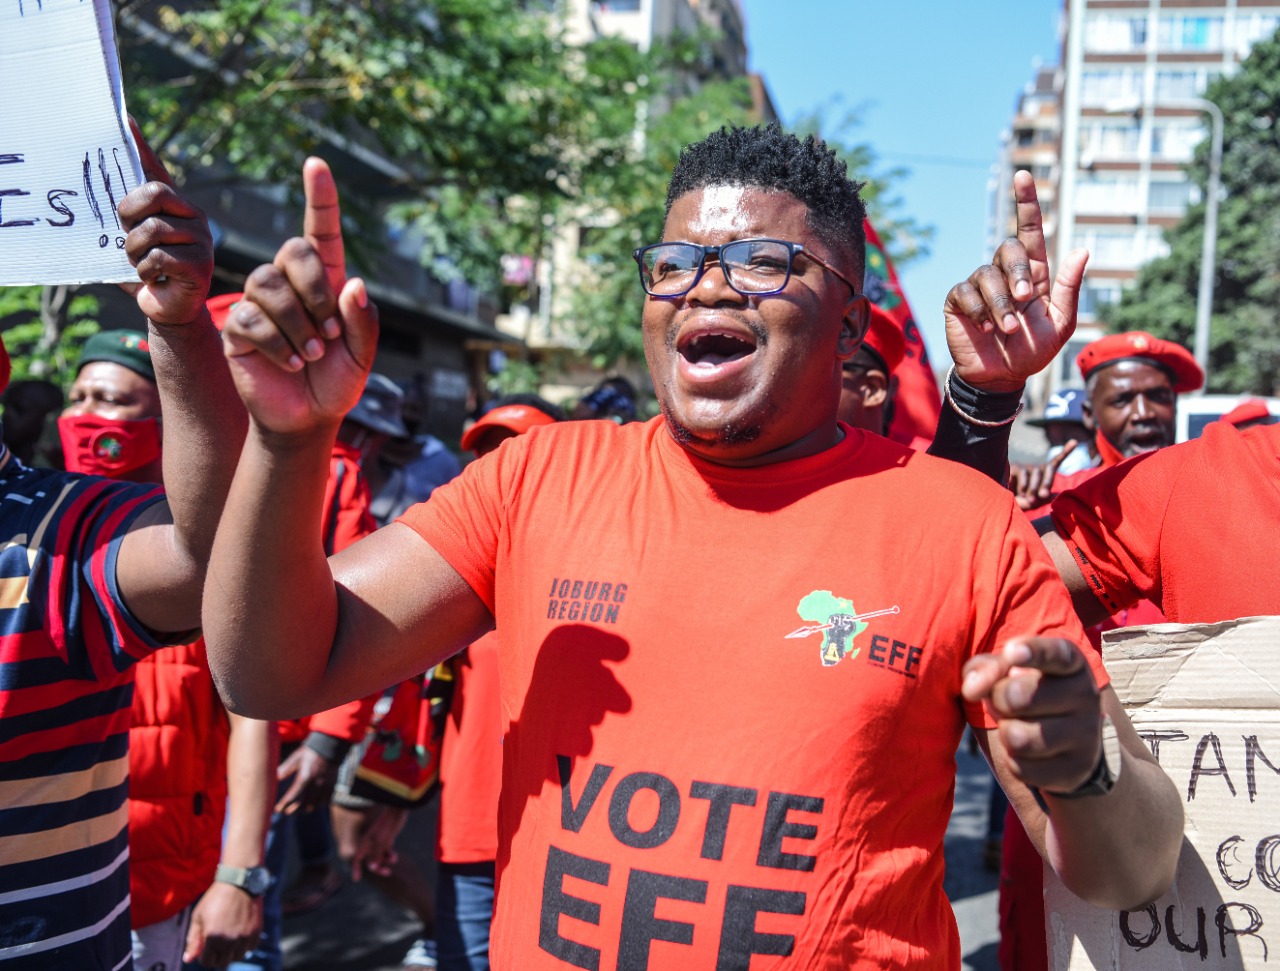 EFF pickets outside Hillbrow police station as they lay charge against Pravin Gordhan